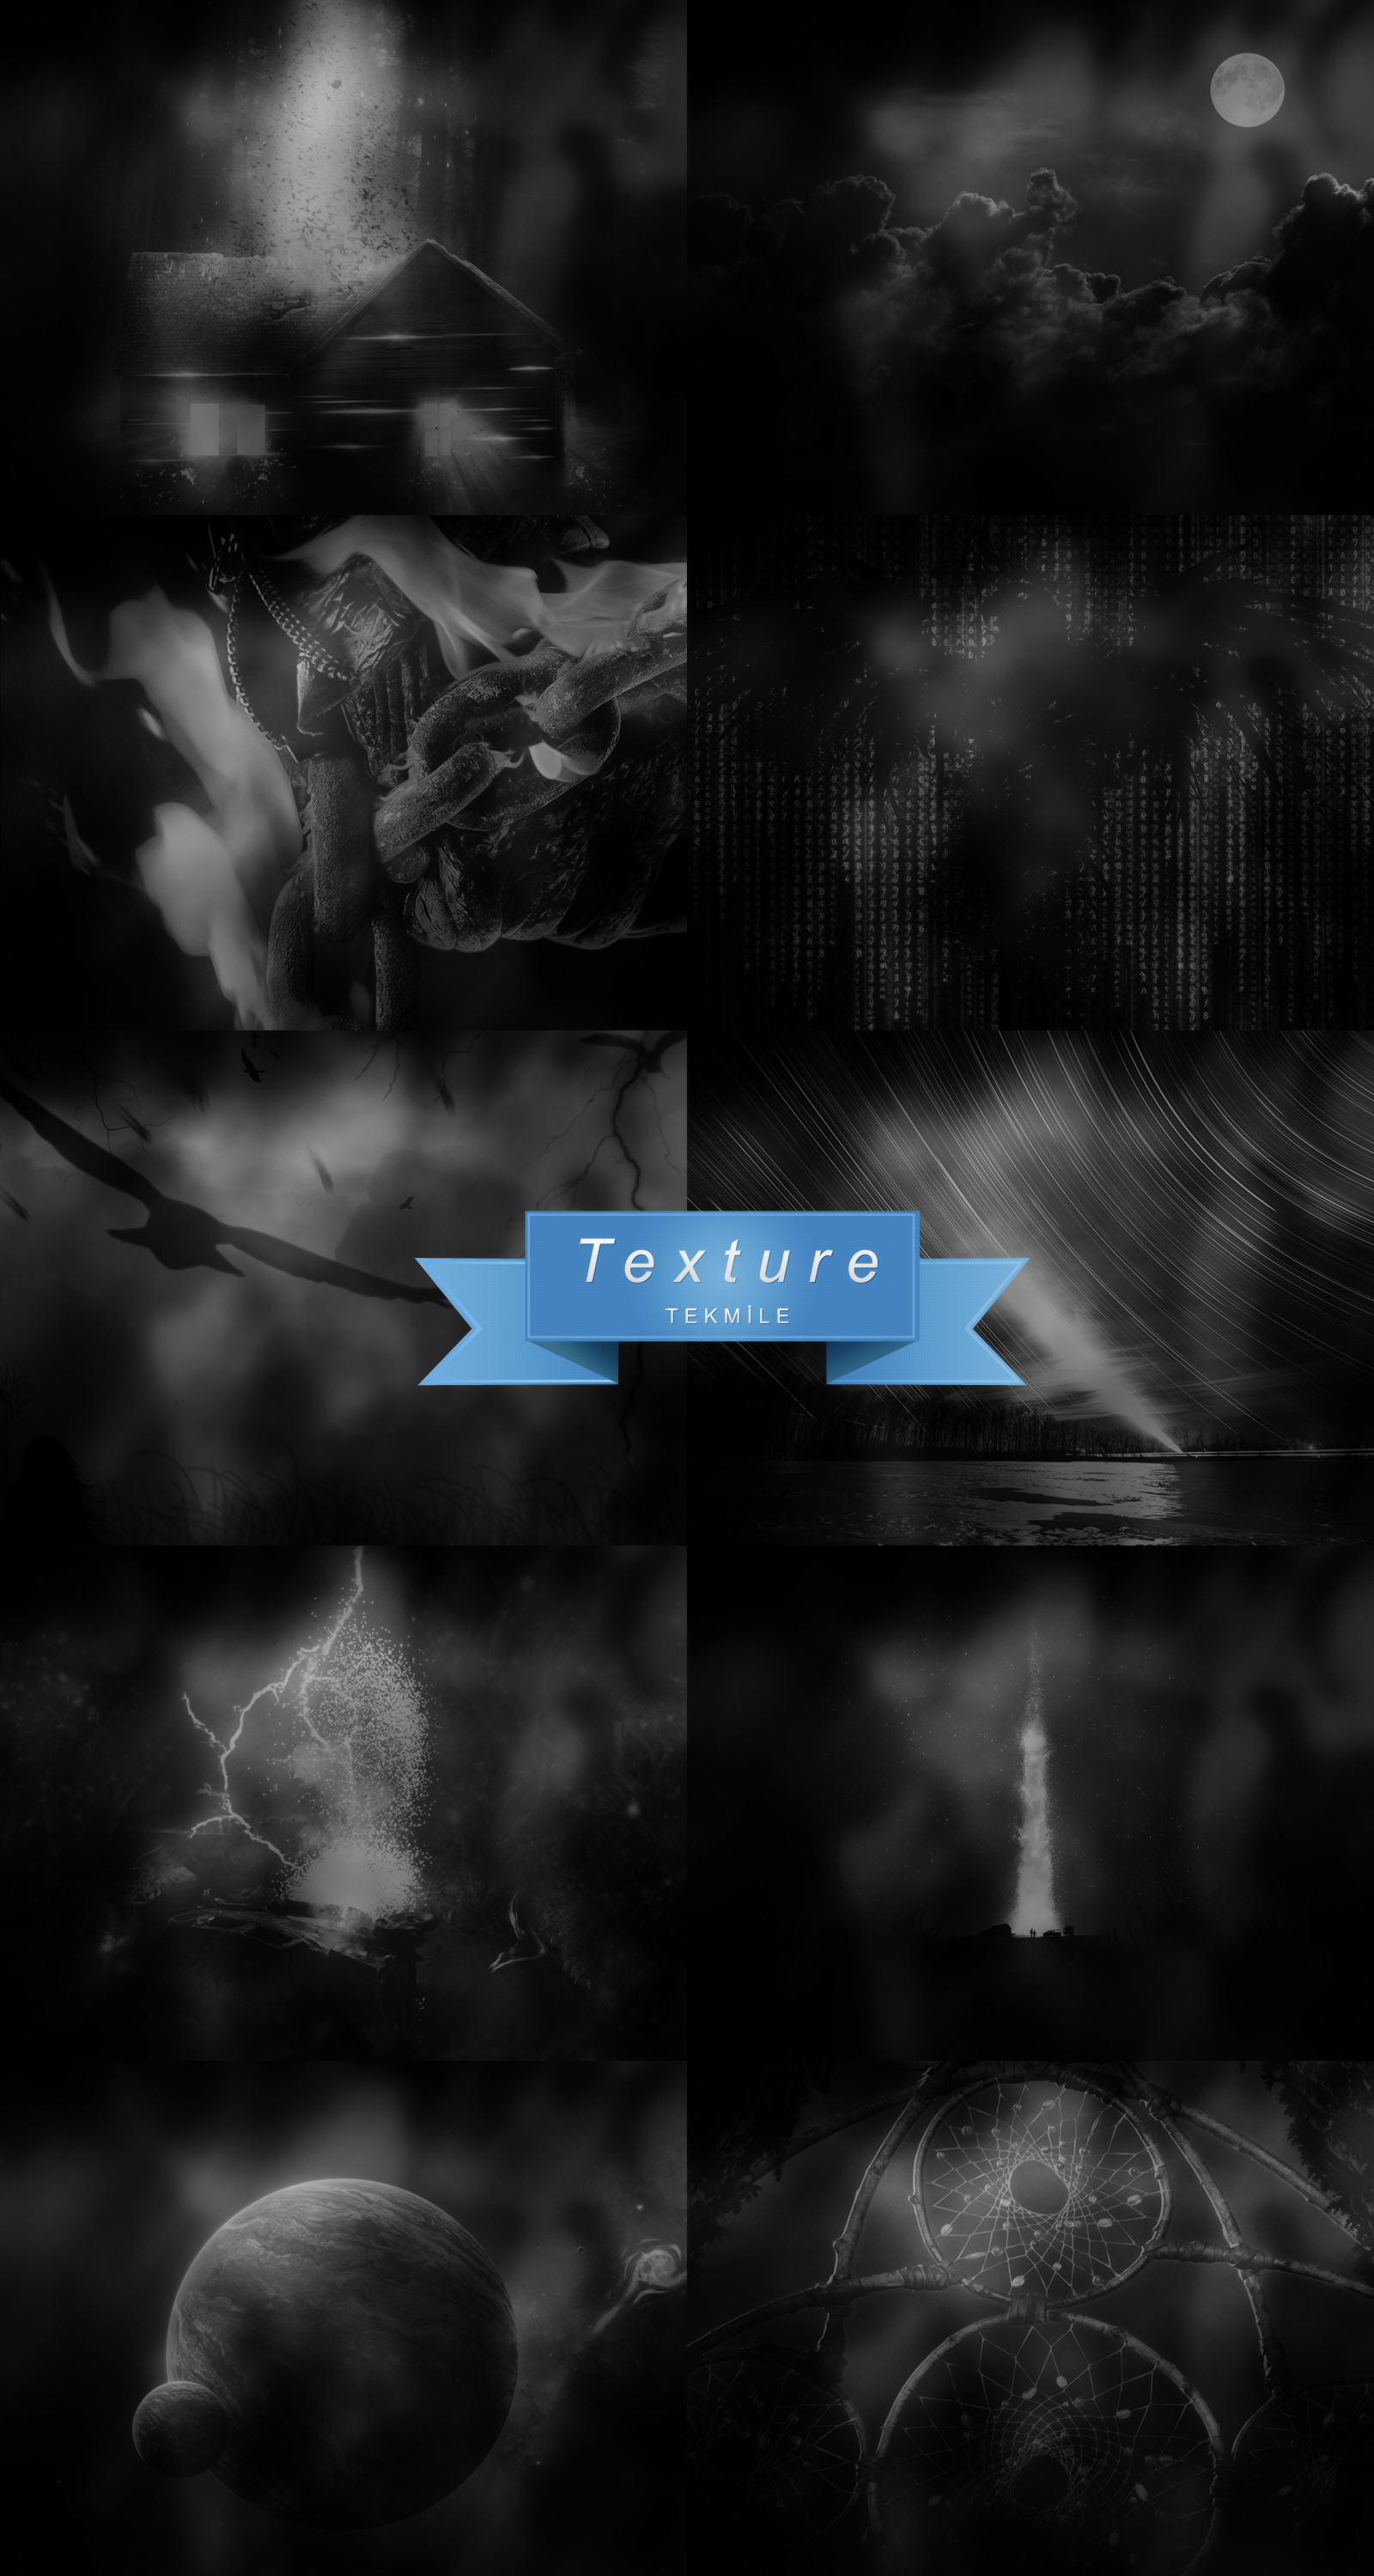 Texture Pack 4